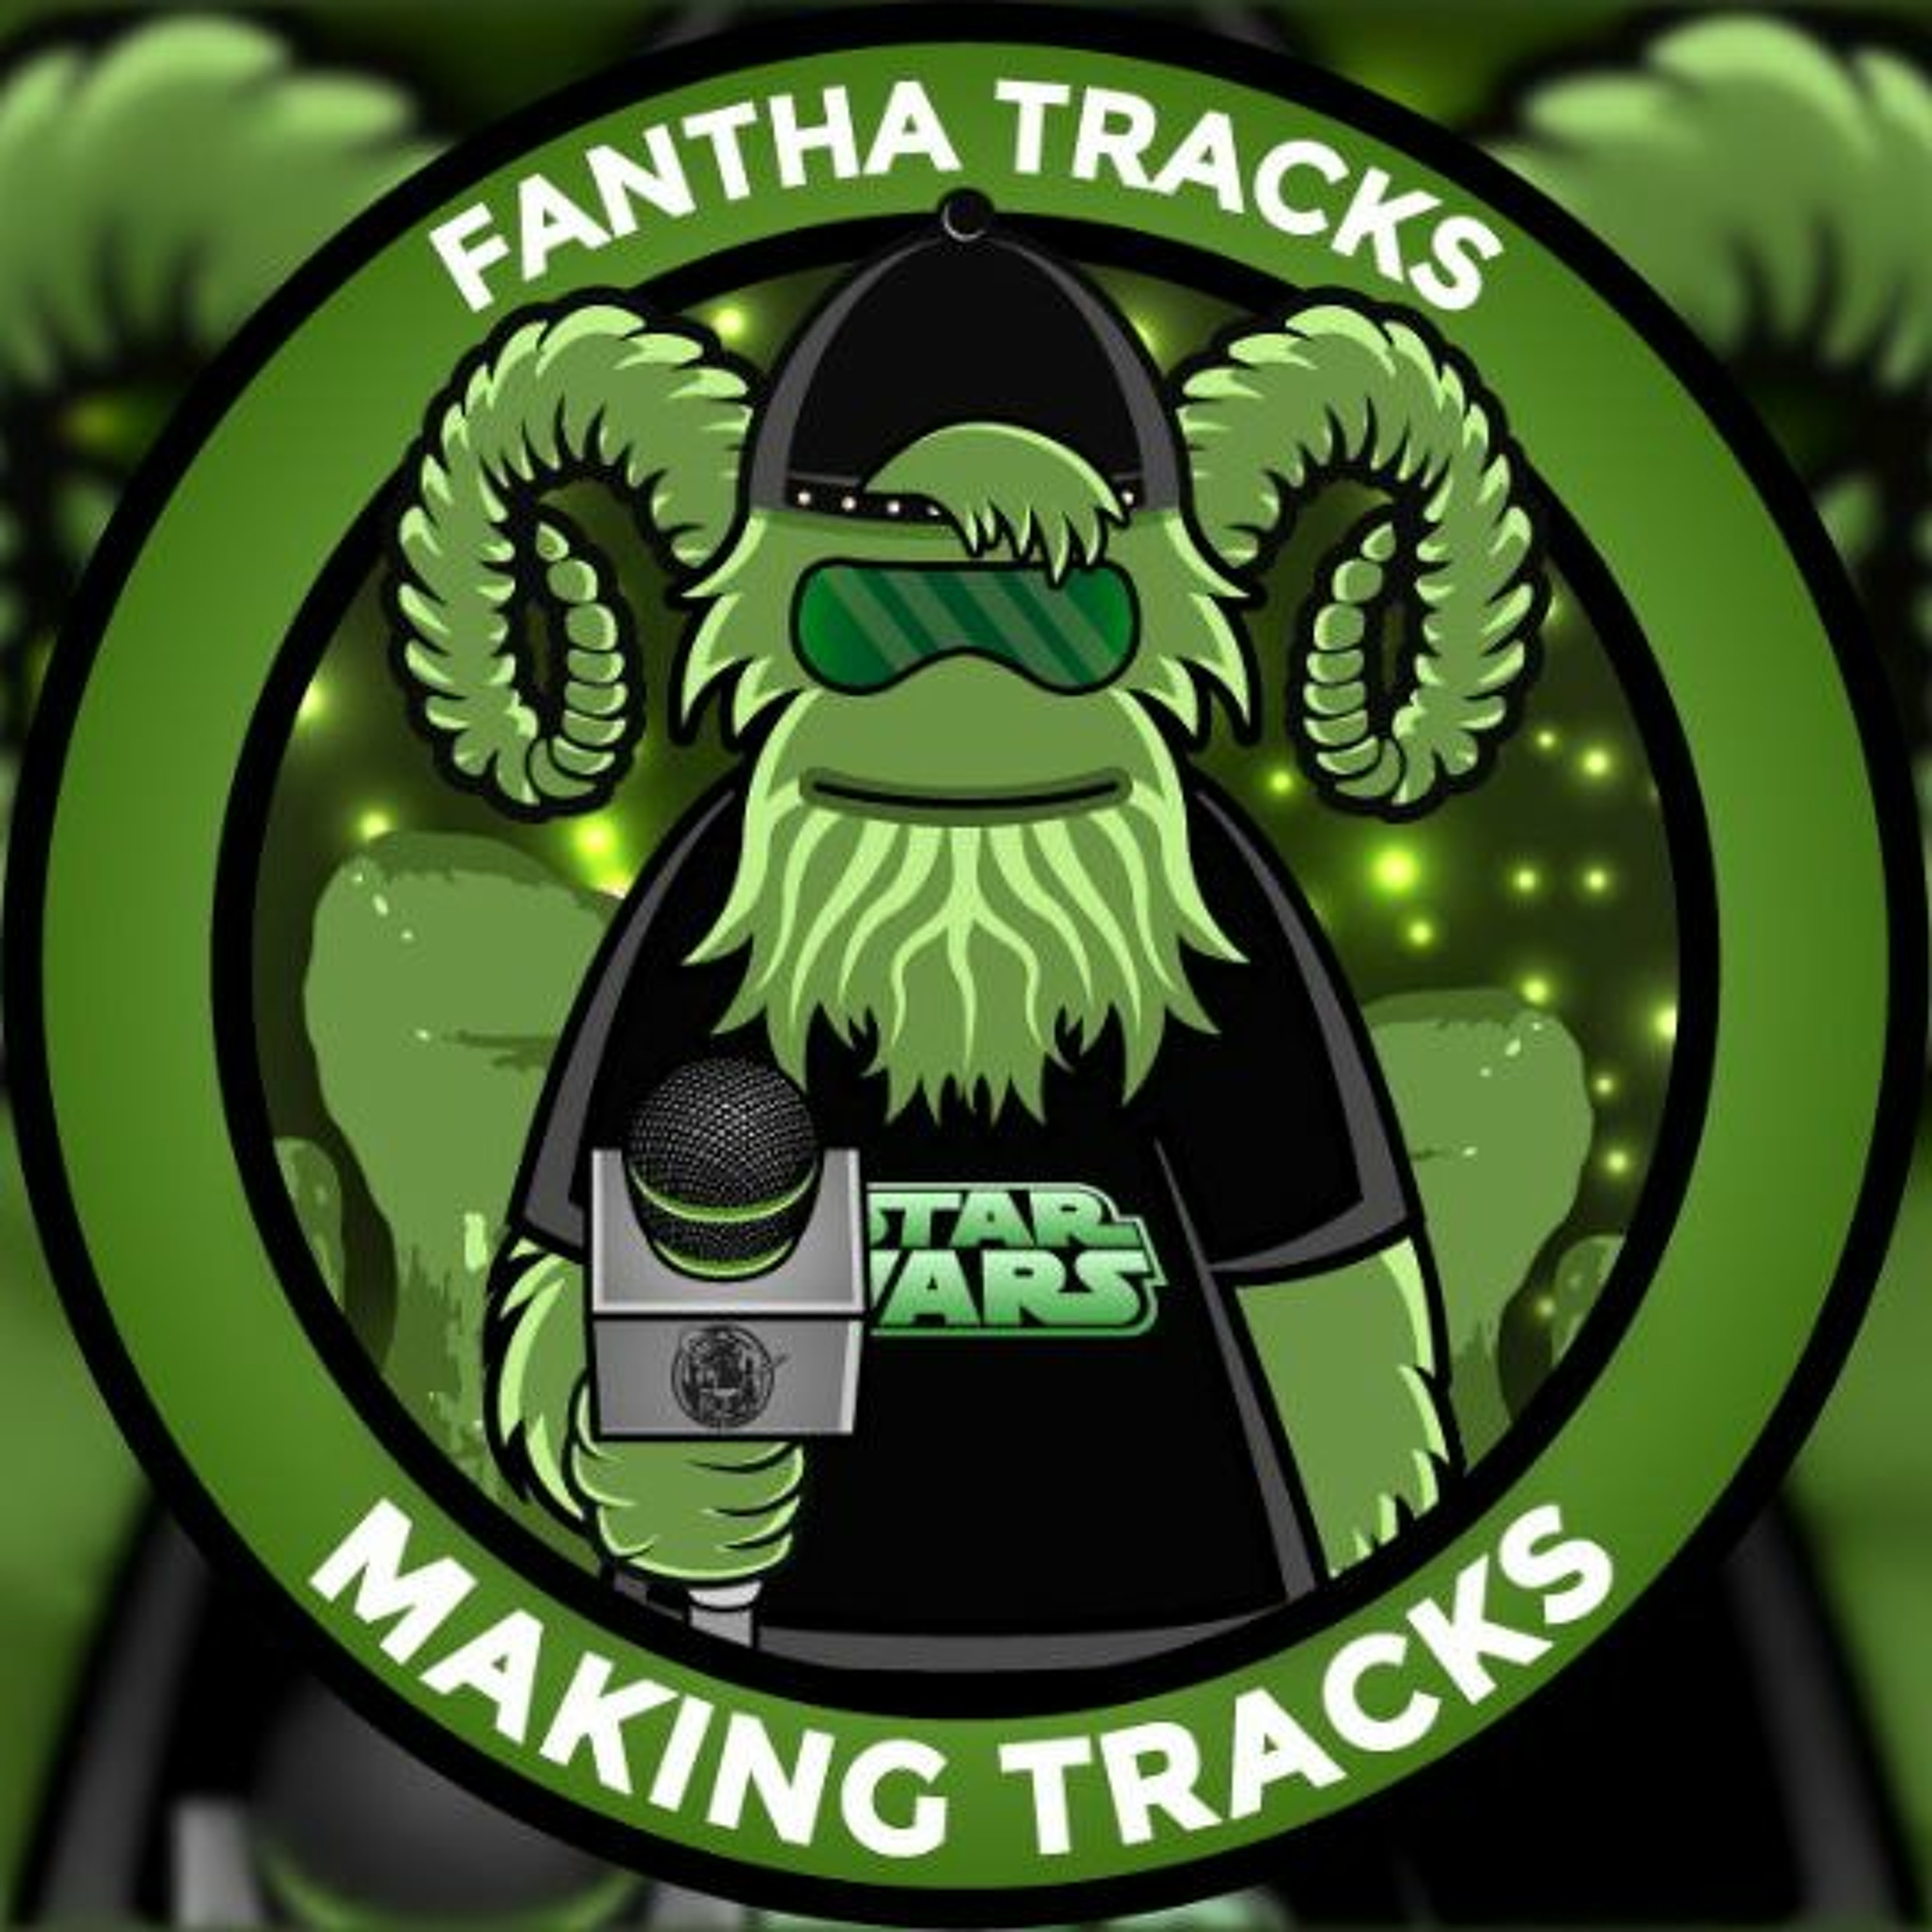 Making Tracks Episode 149: Never let death get in the way of a good story